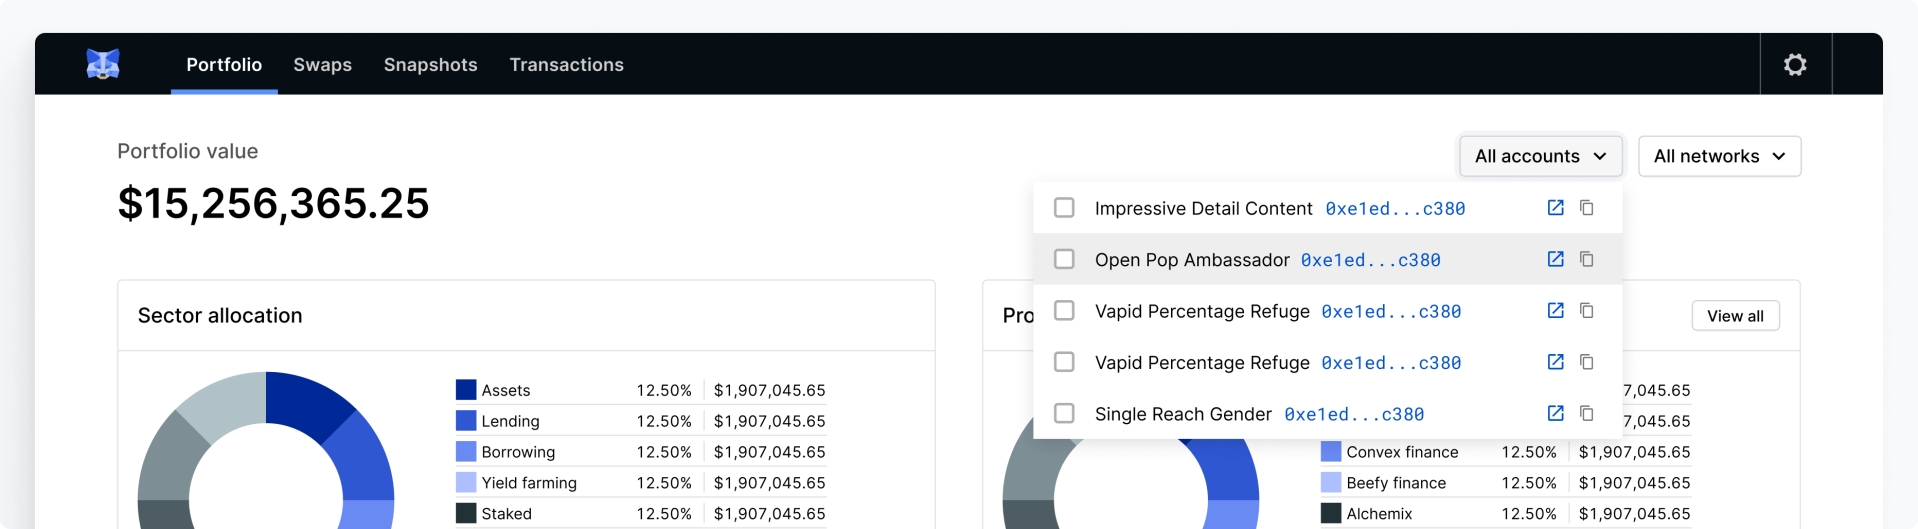 Addition of account filtering functionality in the Portfolio Dashboard